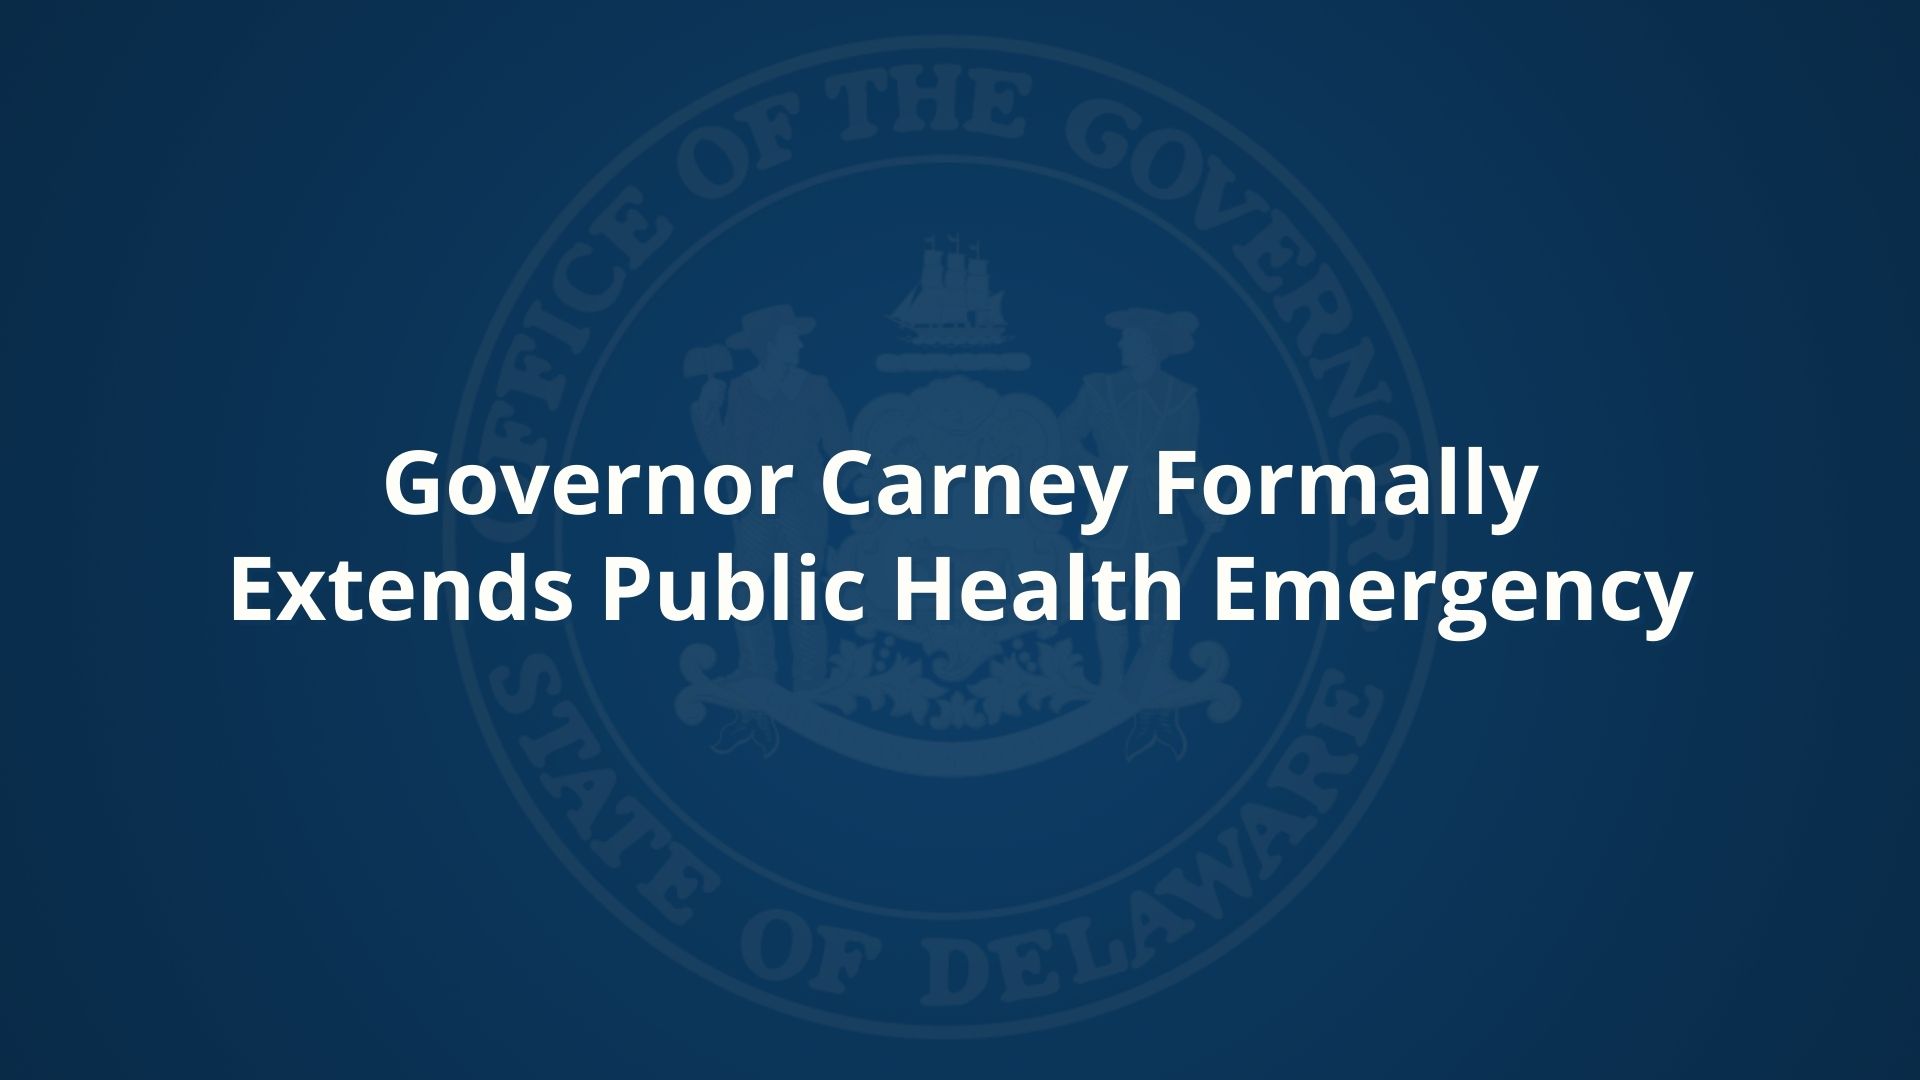 Governor Carney Formally Extends Public Health Emergency" written in white text over a dark blue background and Office of the Govenor seal.